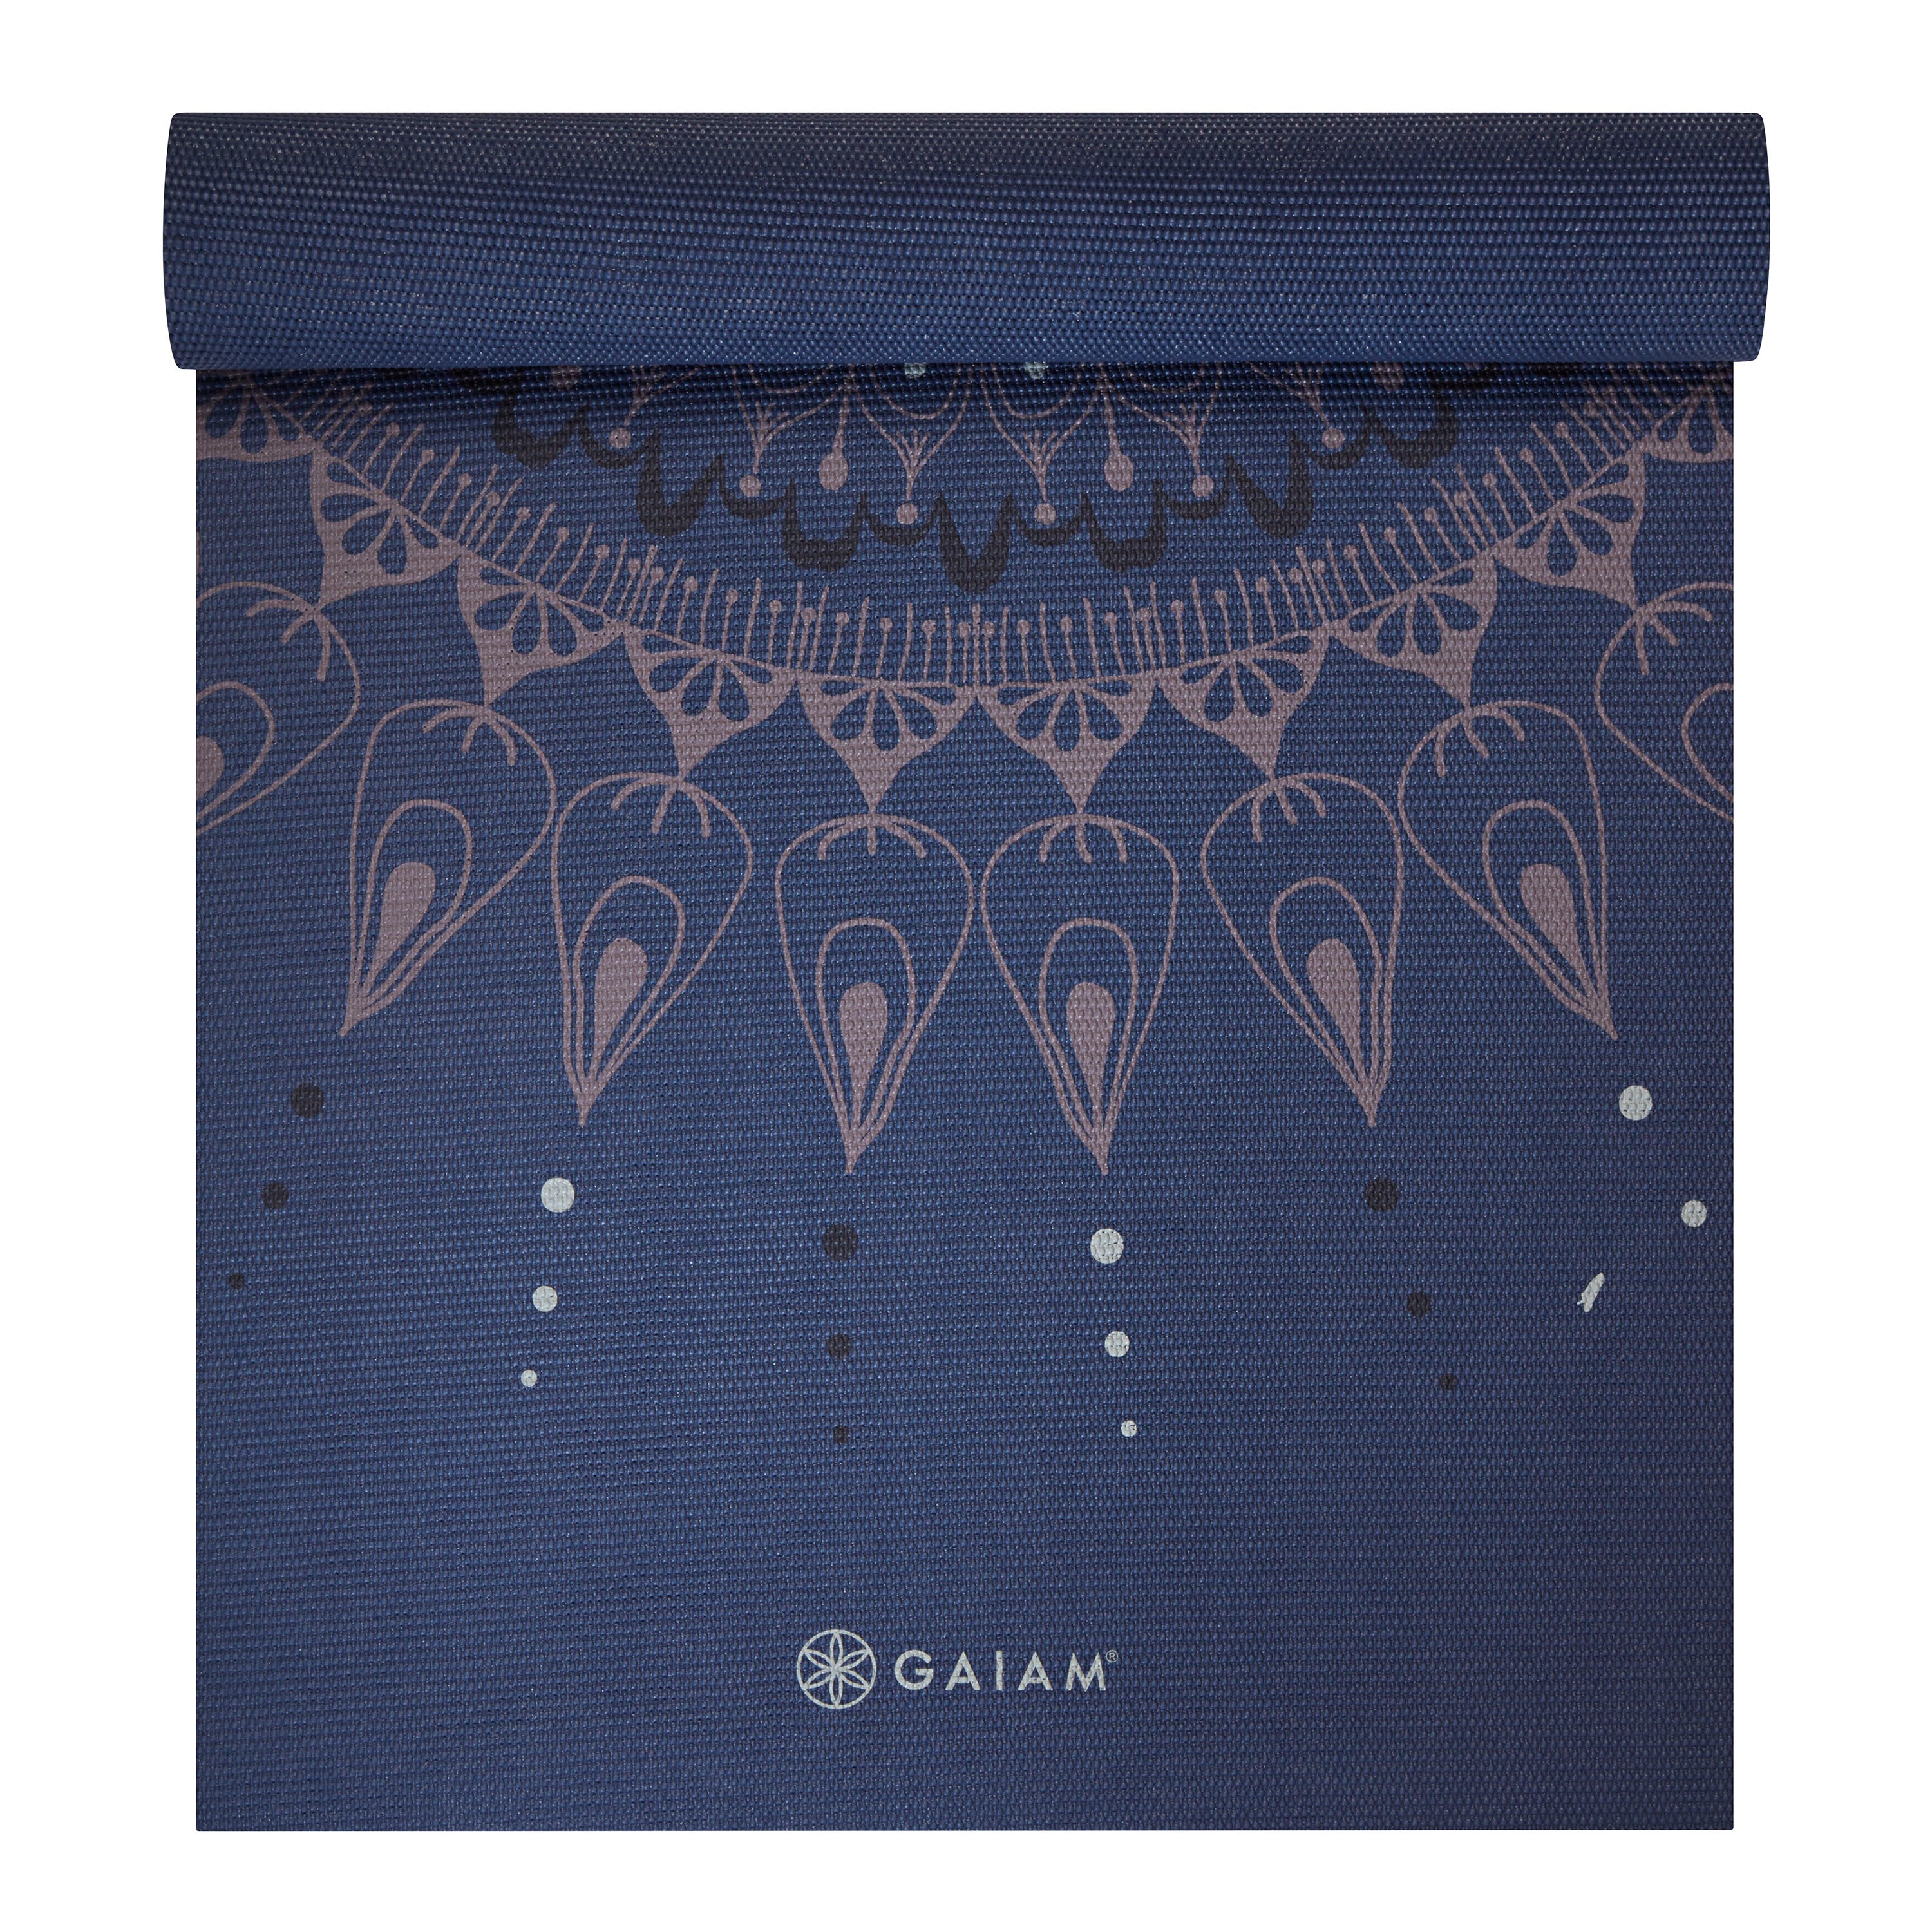 Premium Here and Now Yoga Mat (6mm)